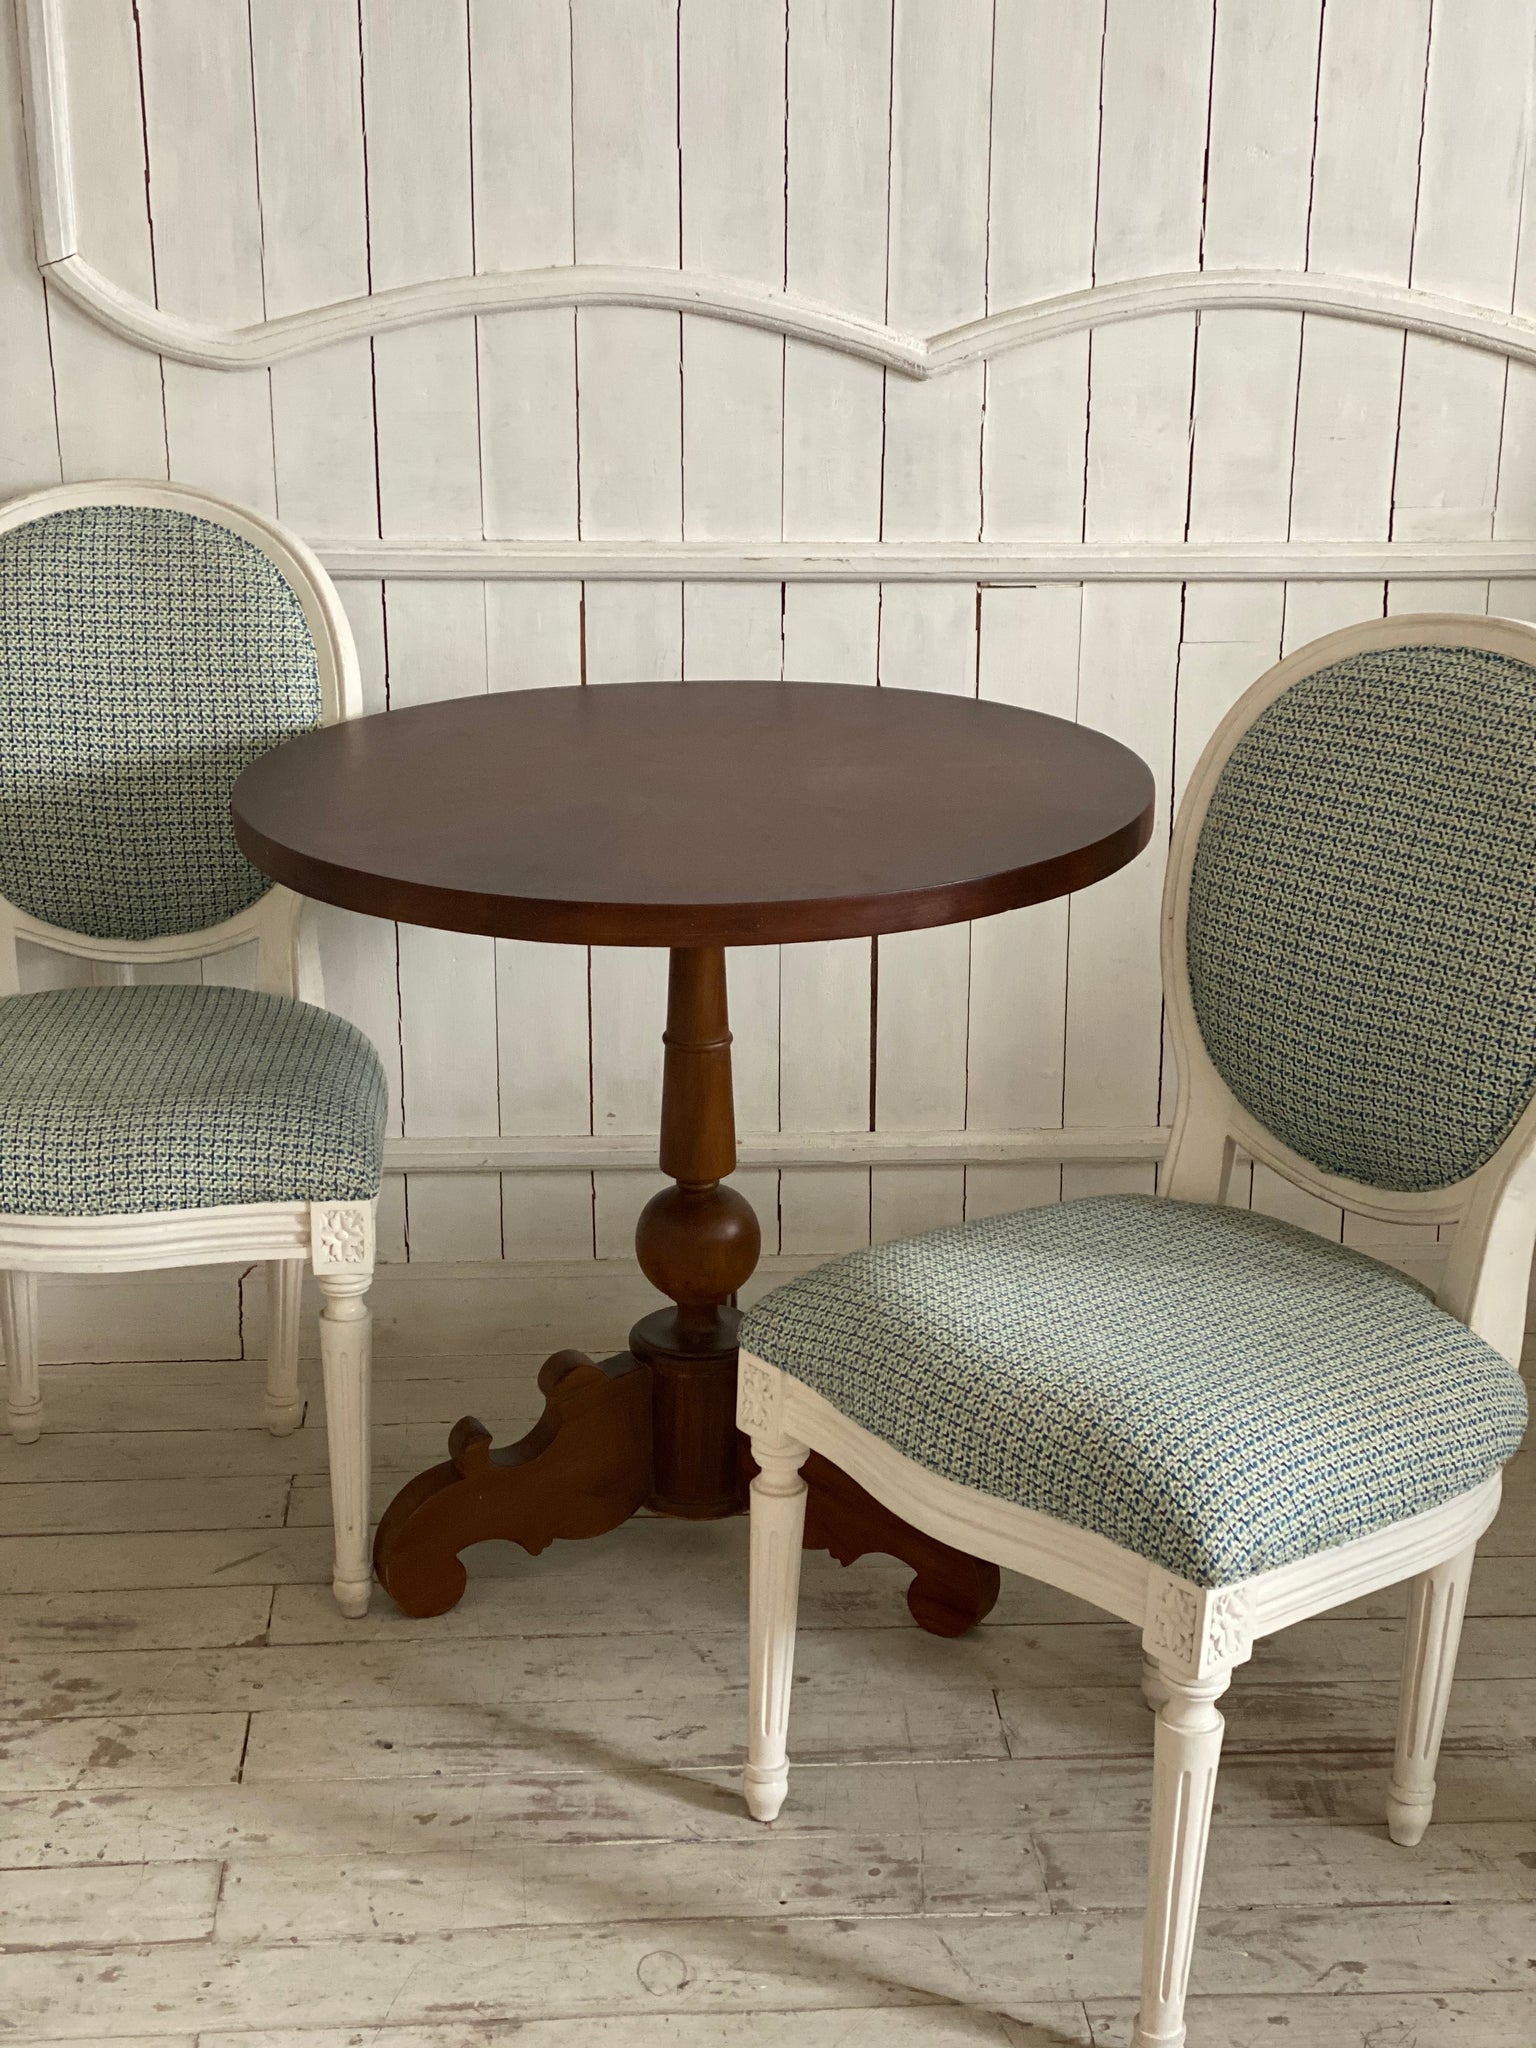 A set of two Louis XVI chairs with a petite table